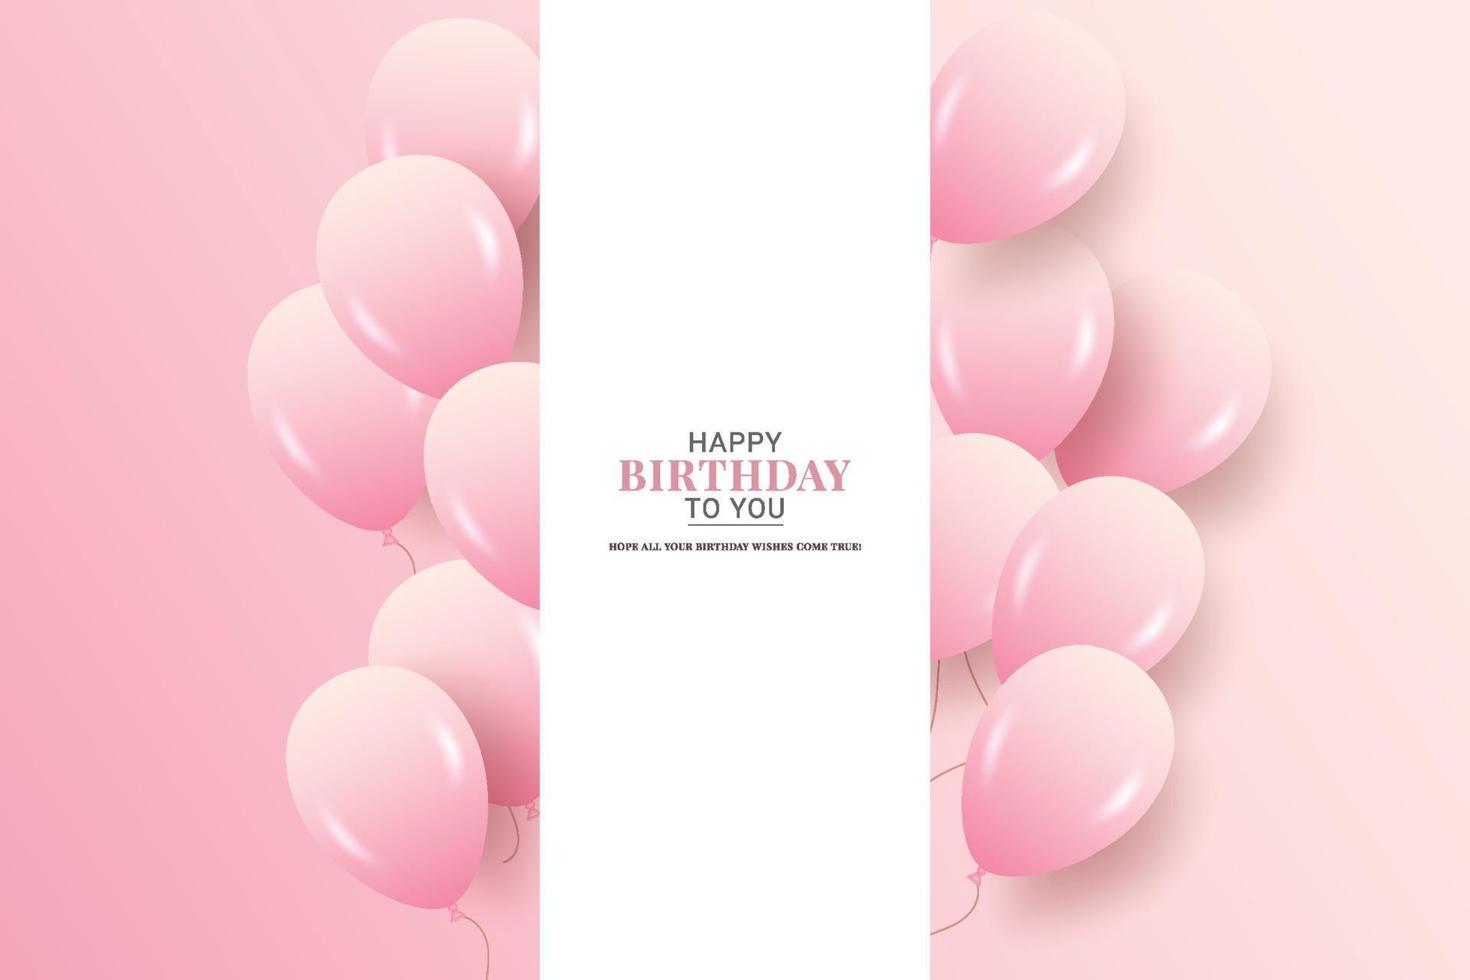 Birthday wish with realistic pink purple   balloons set  and pink background and text vector